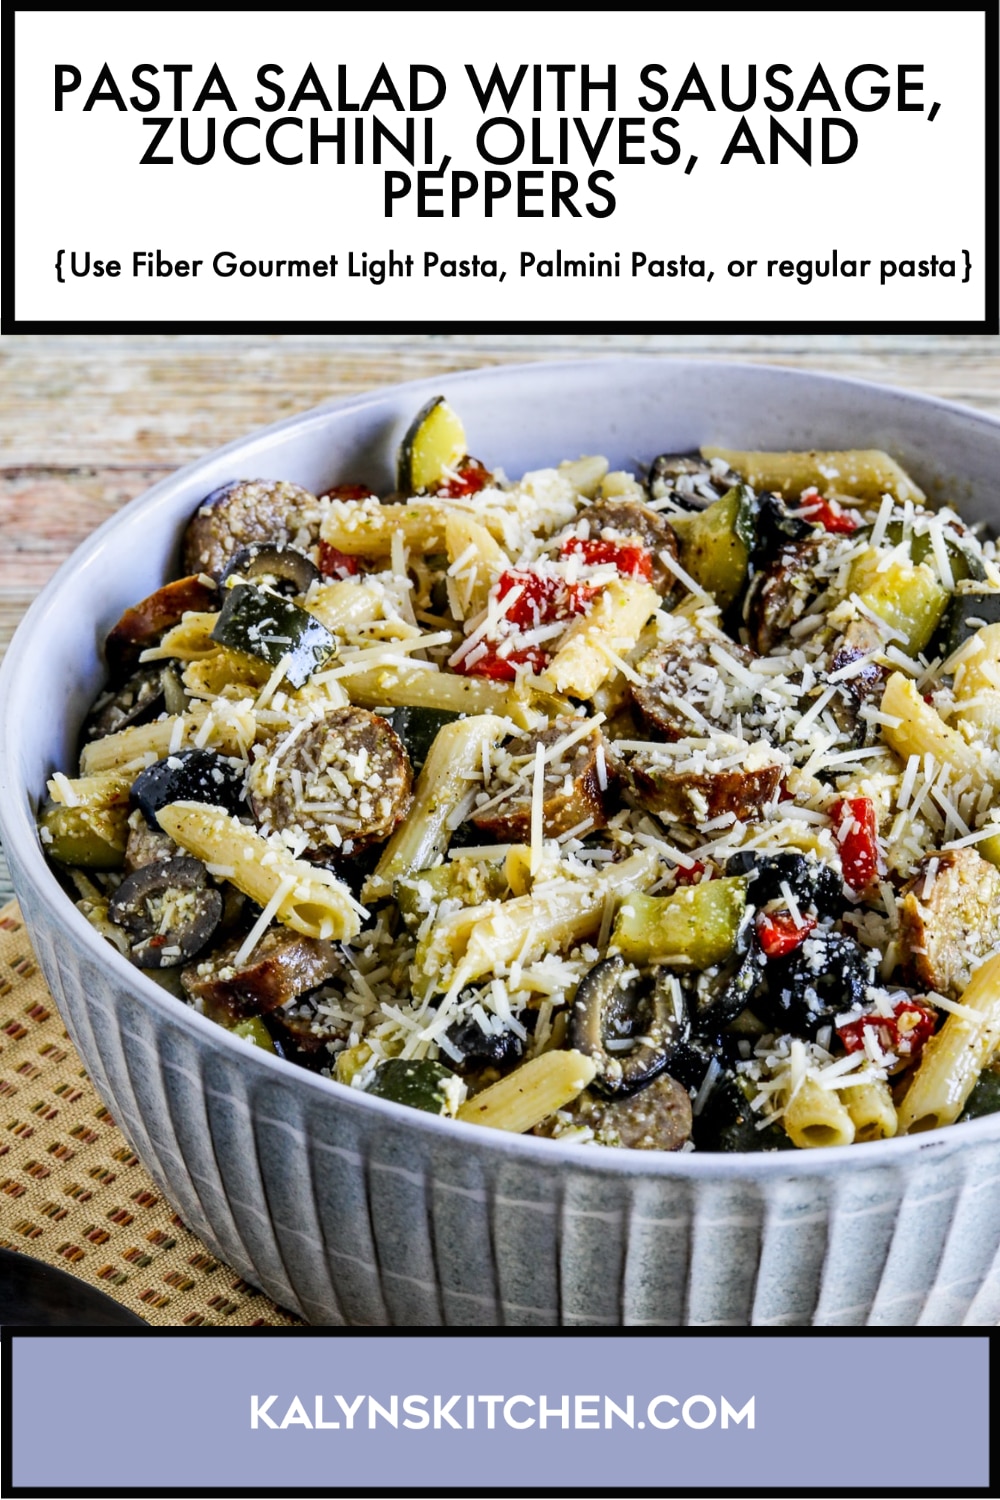 Pinterest image of Pasta Salad with Sausage, Zucchini, Olives, and Peppers